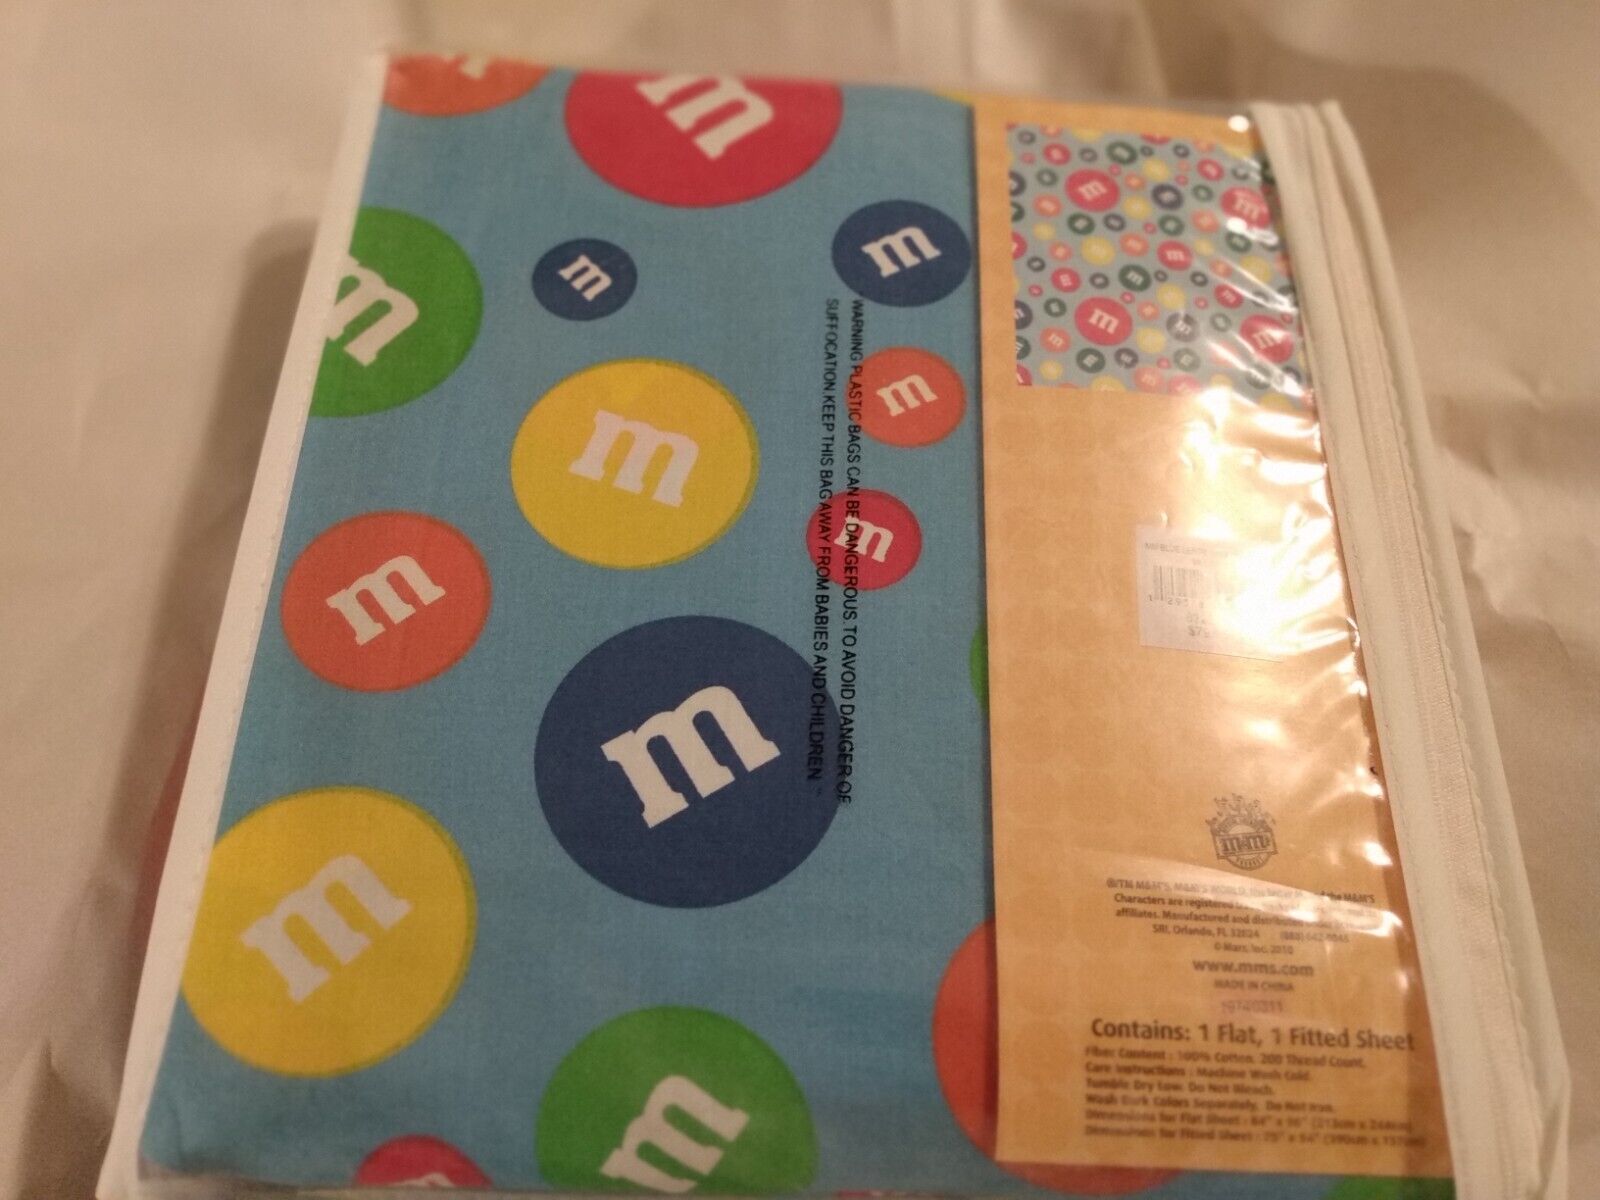 Rare M&M\'s Candy FULL Size Sheets Set 1 Flat & 1 Fitted Sheet RARE 2 PCs.